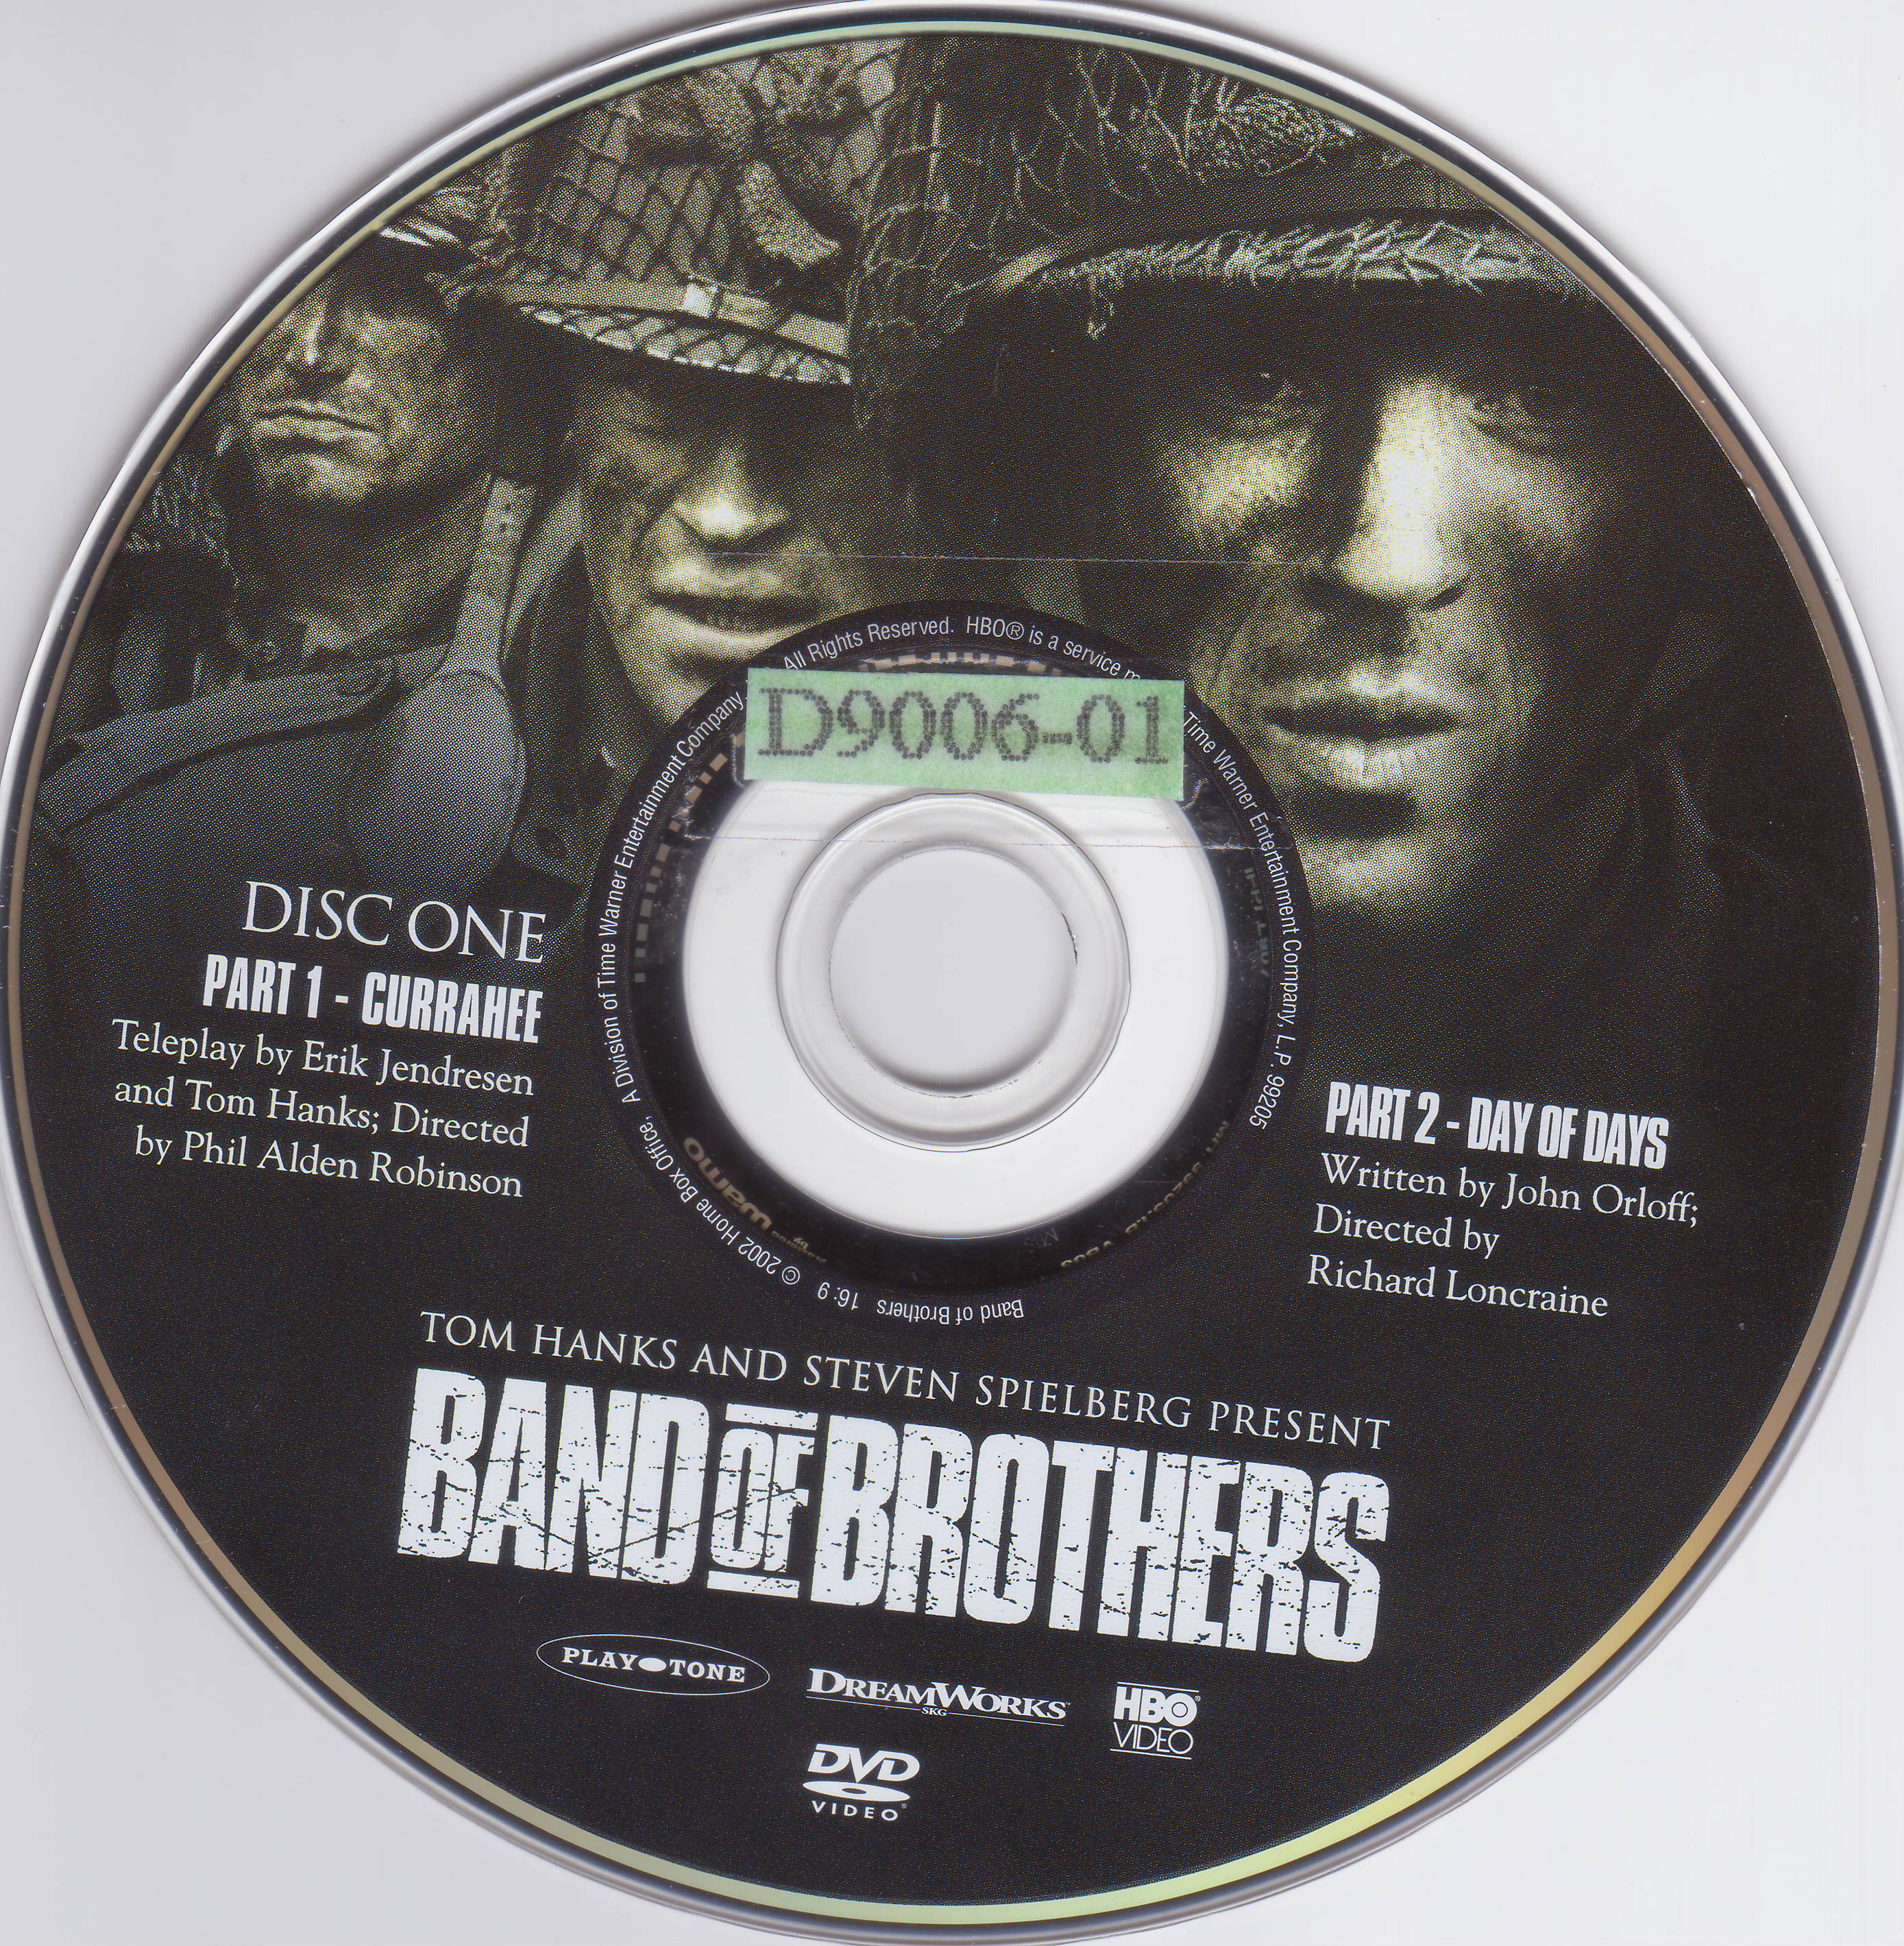 Band of brothers vol 1